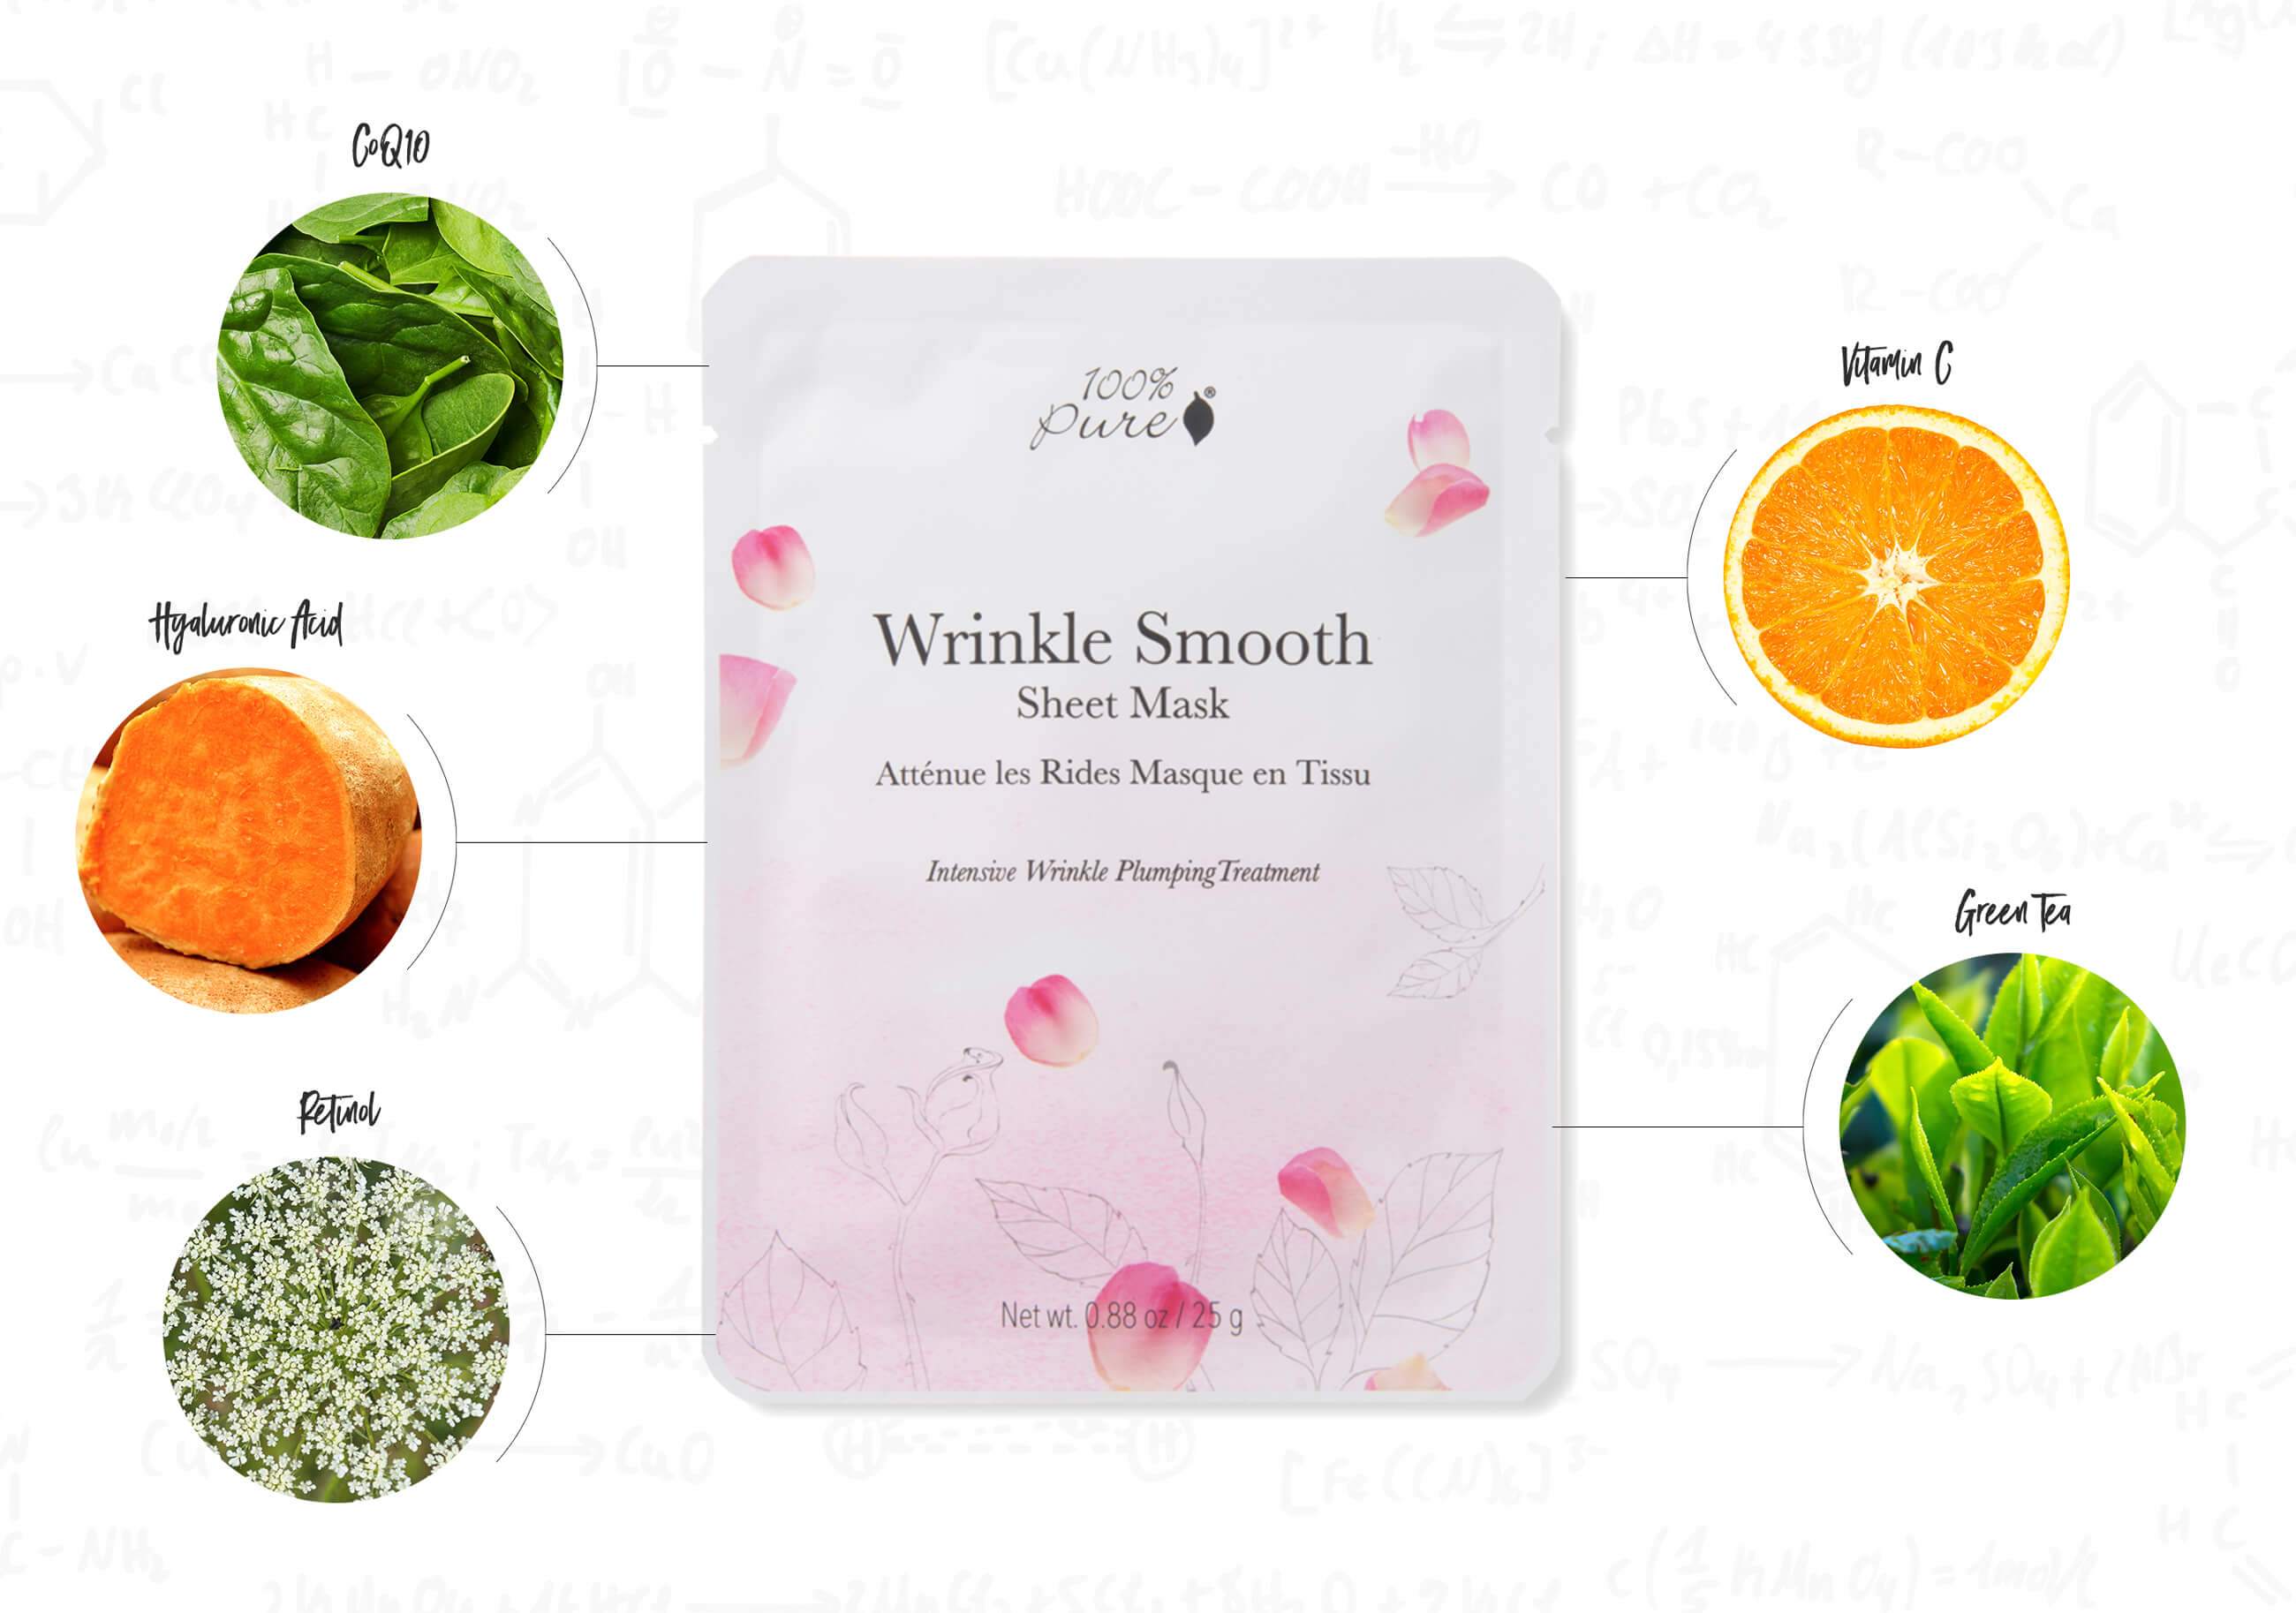 Wrinkle smooth sheet mask infographic